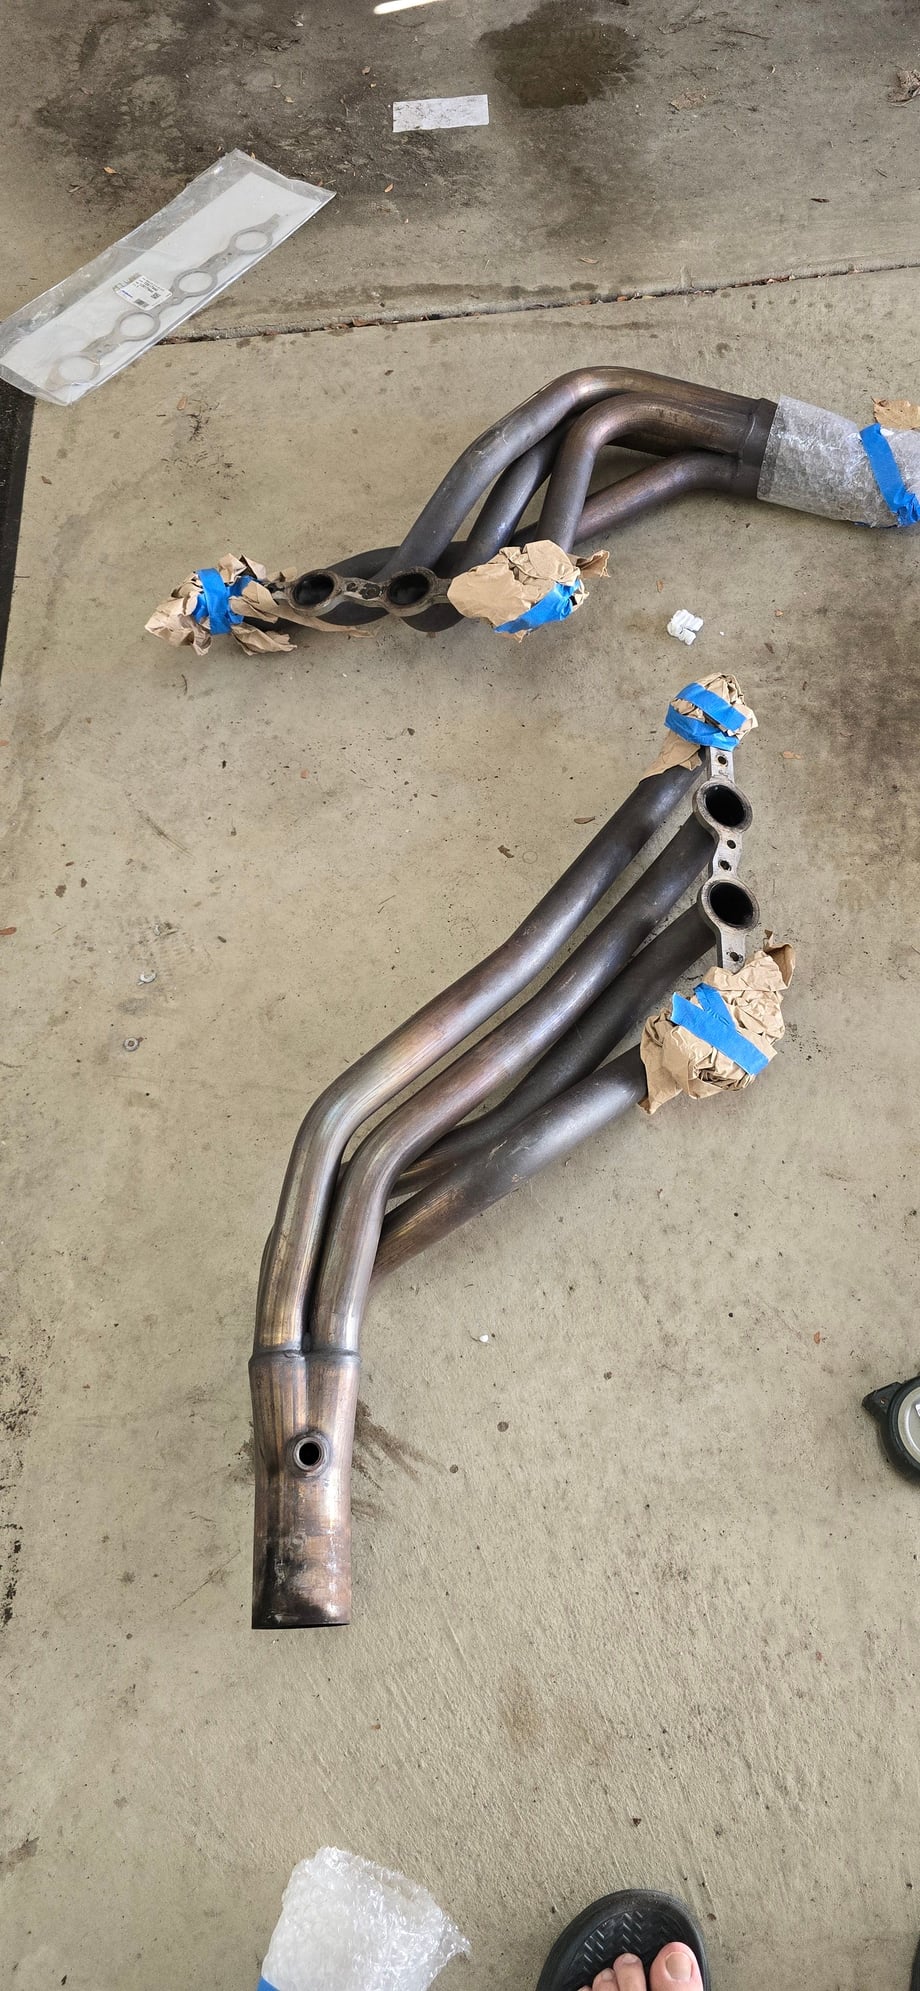 Engine - Power Adders - Kooks headers and a few other parts - Used - 1998 to 2002 Pontiac Firebird - 1998 to 2002 Chevrolet Camaro - Chicago, IL 60638, United States